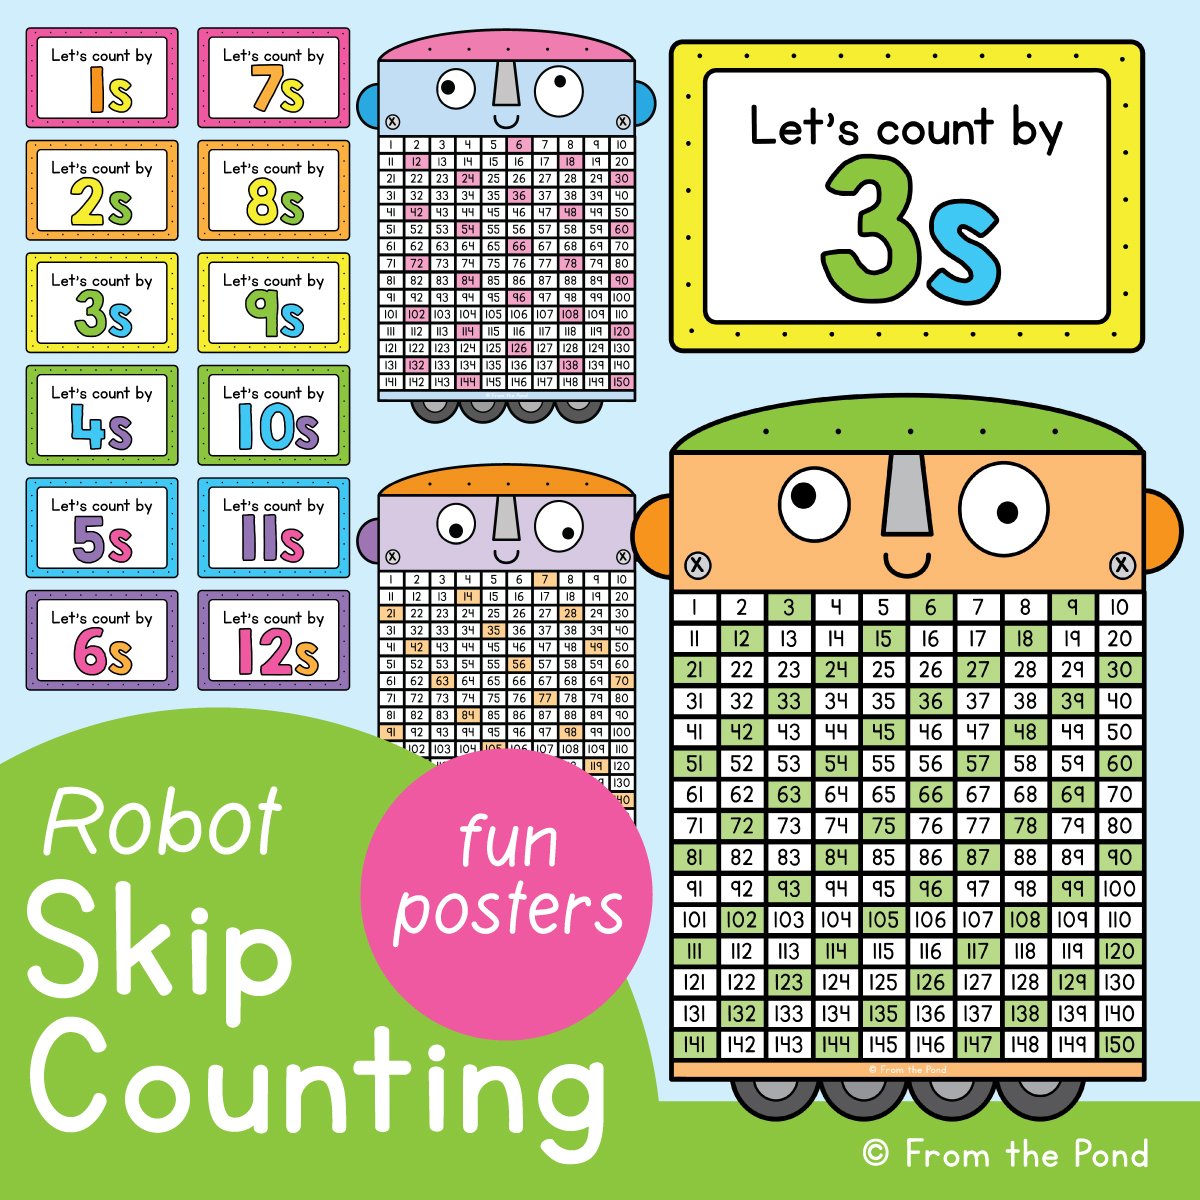 Skip Counting Posters